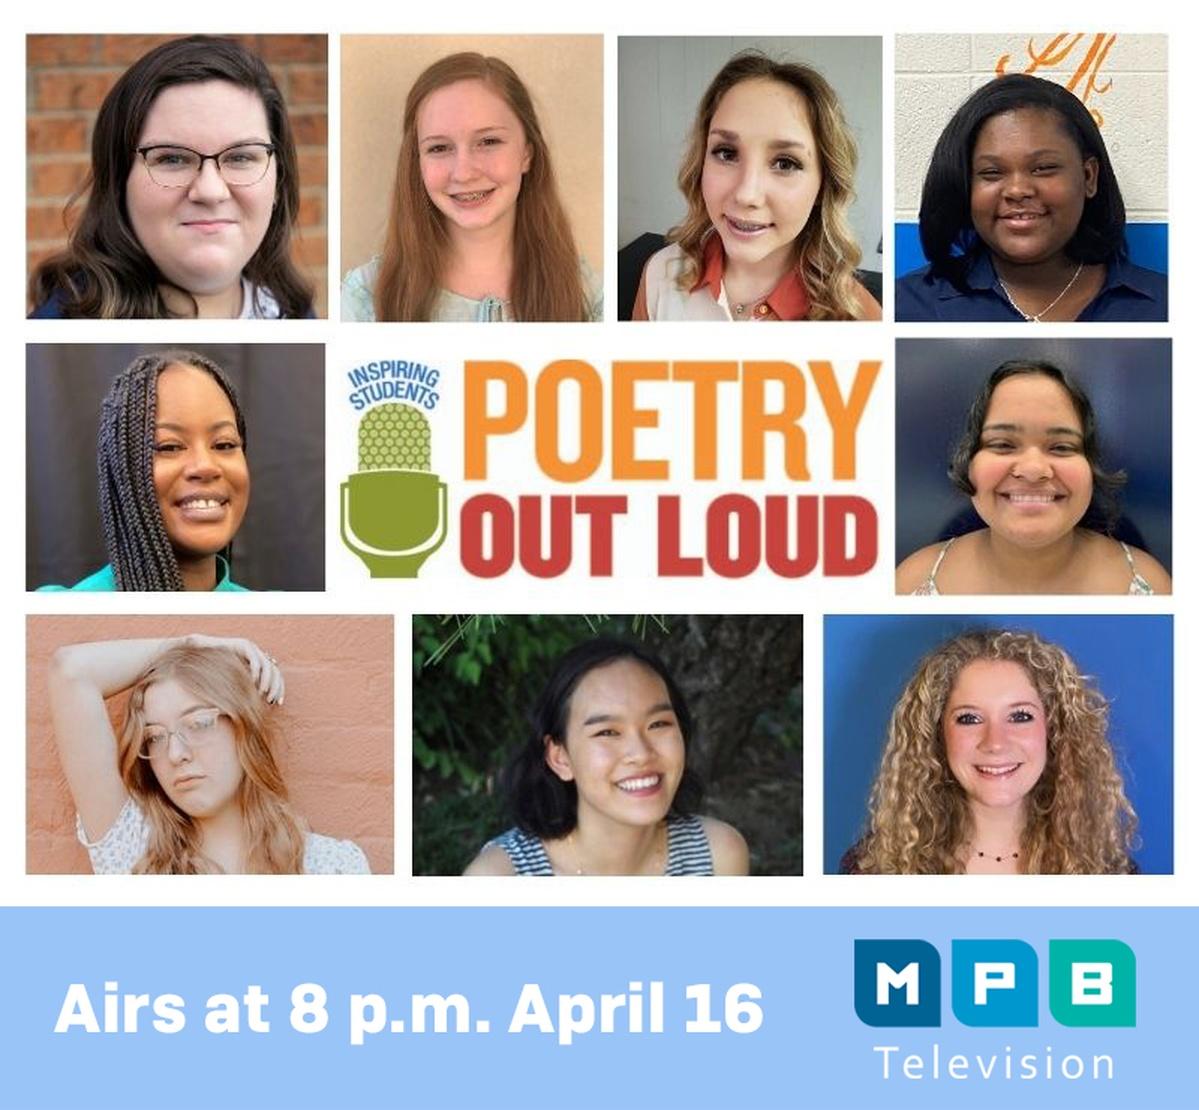 2021 Mississippi Poetry Out Loud contest airs April 16 at 8 p.m. on MPB